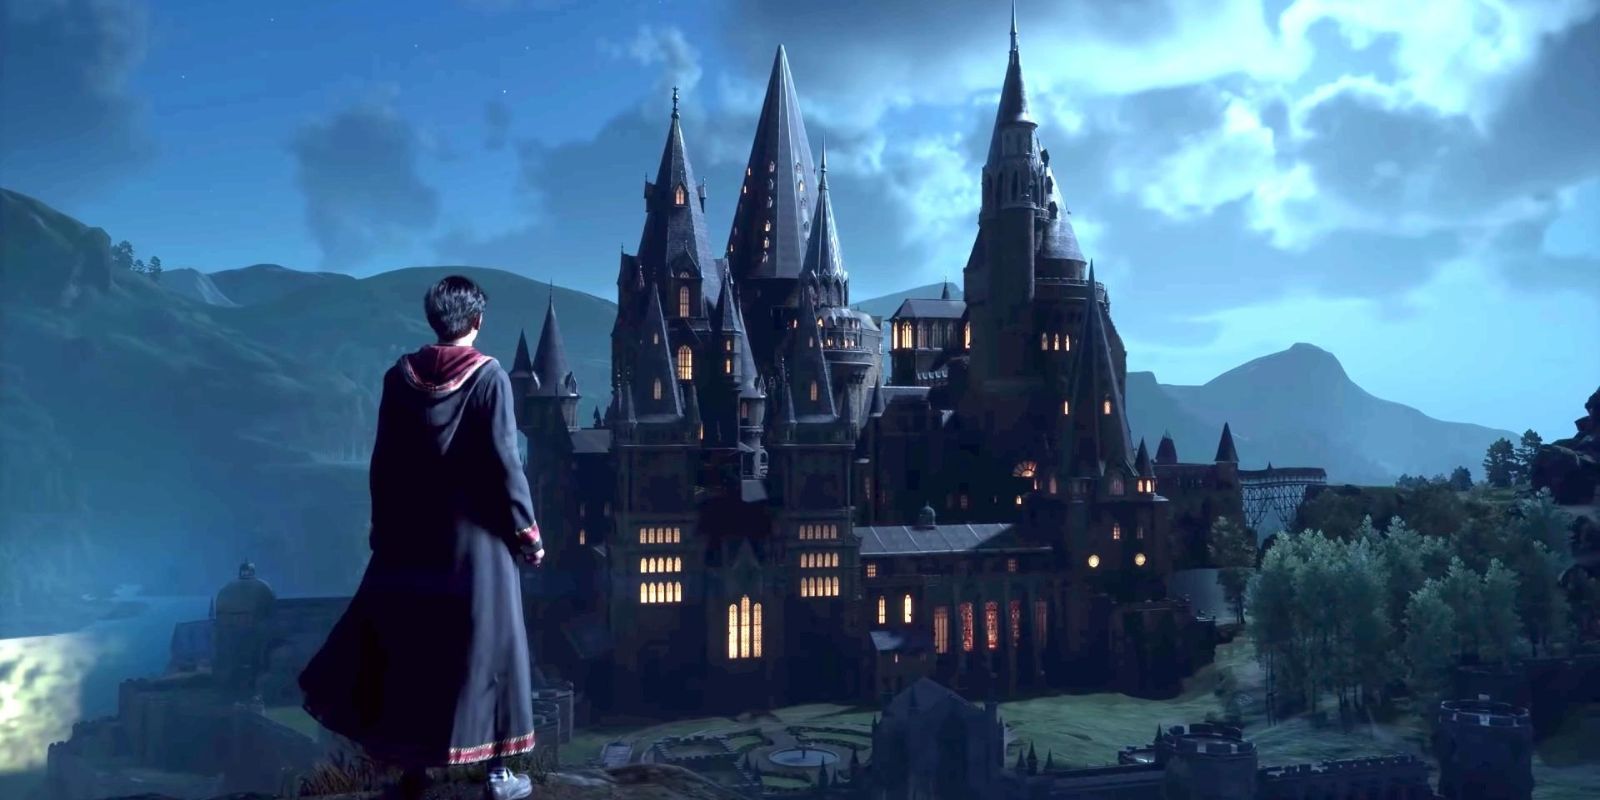 A student stands on a peak and gazes out over Hogwarts